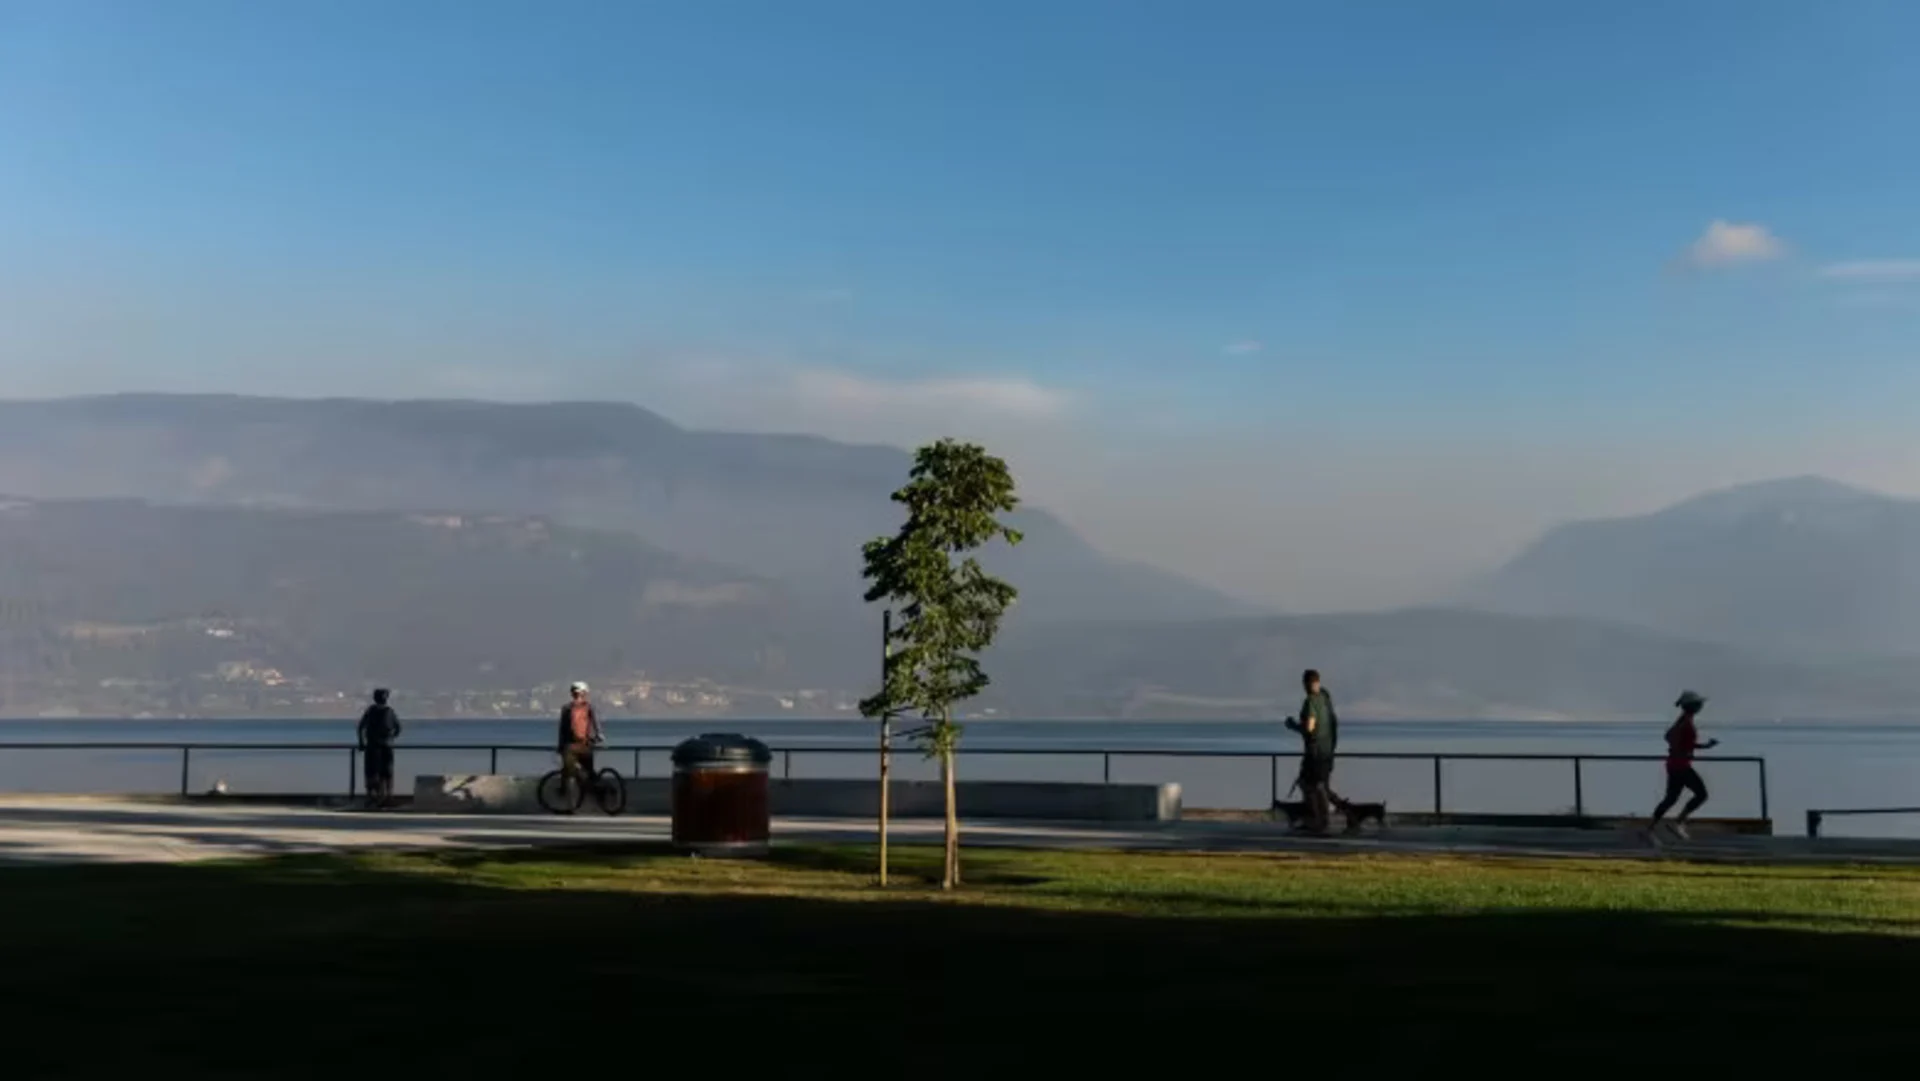 More allowed back home in the Okanagan as rain aids firefighting efforts